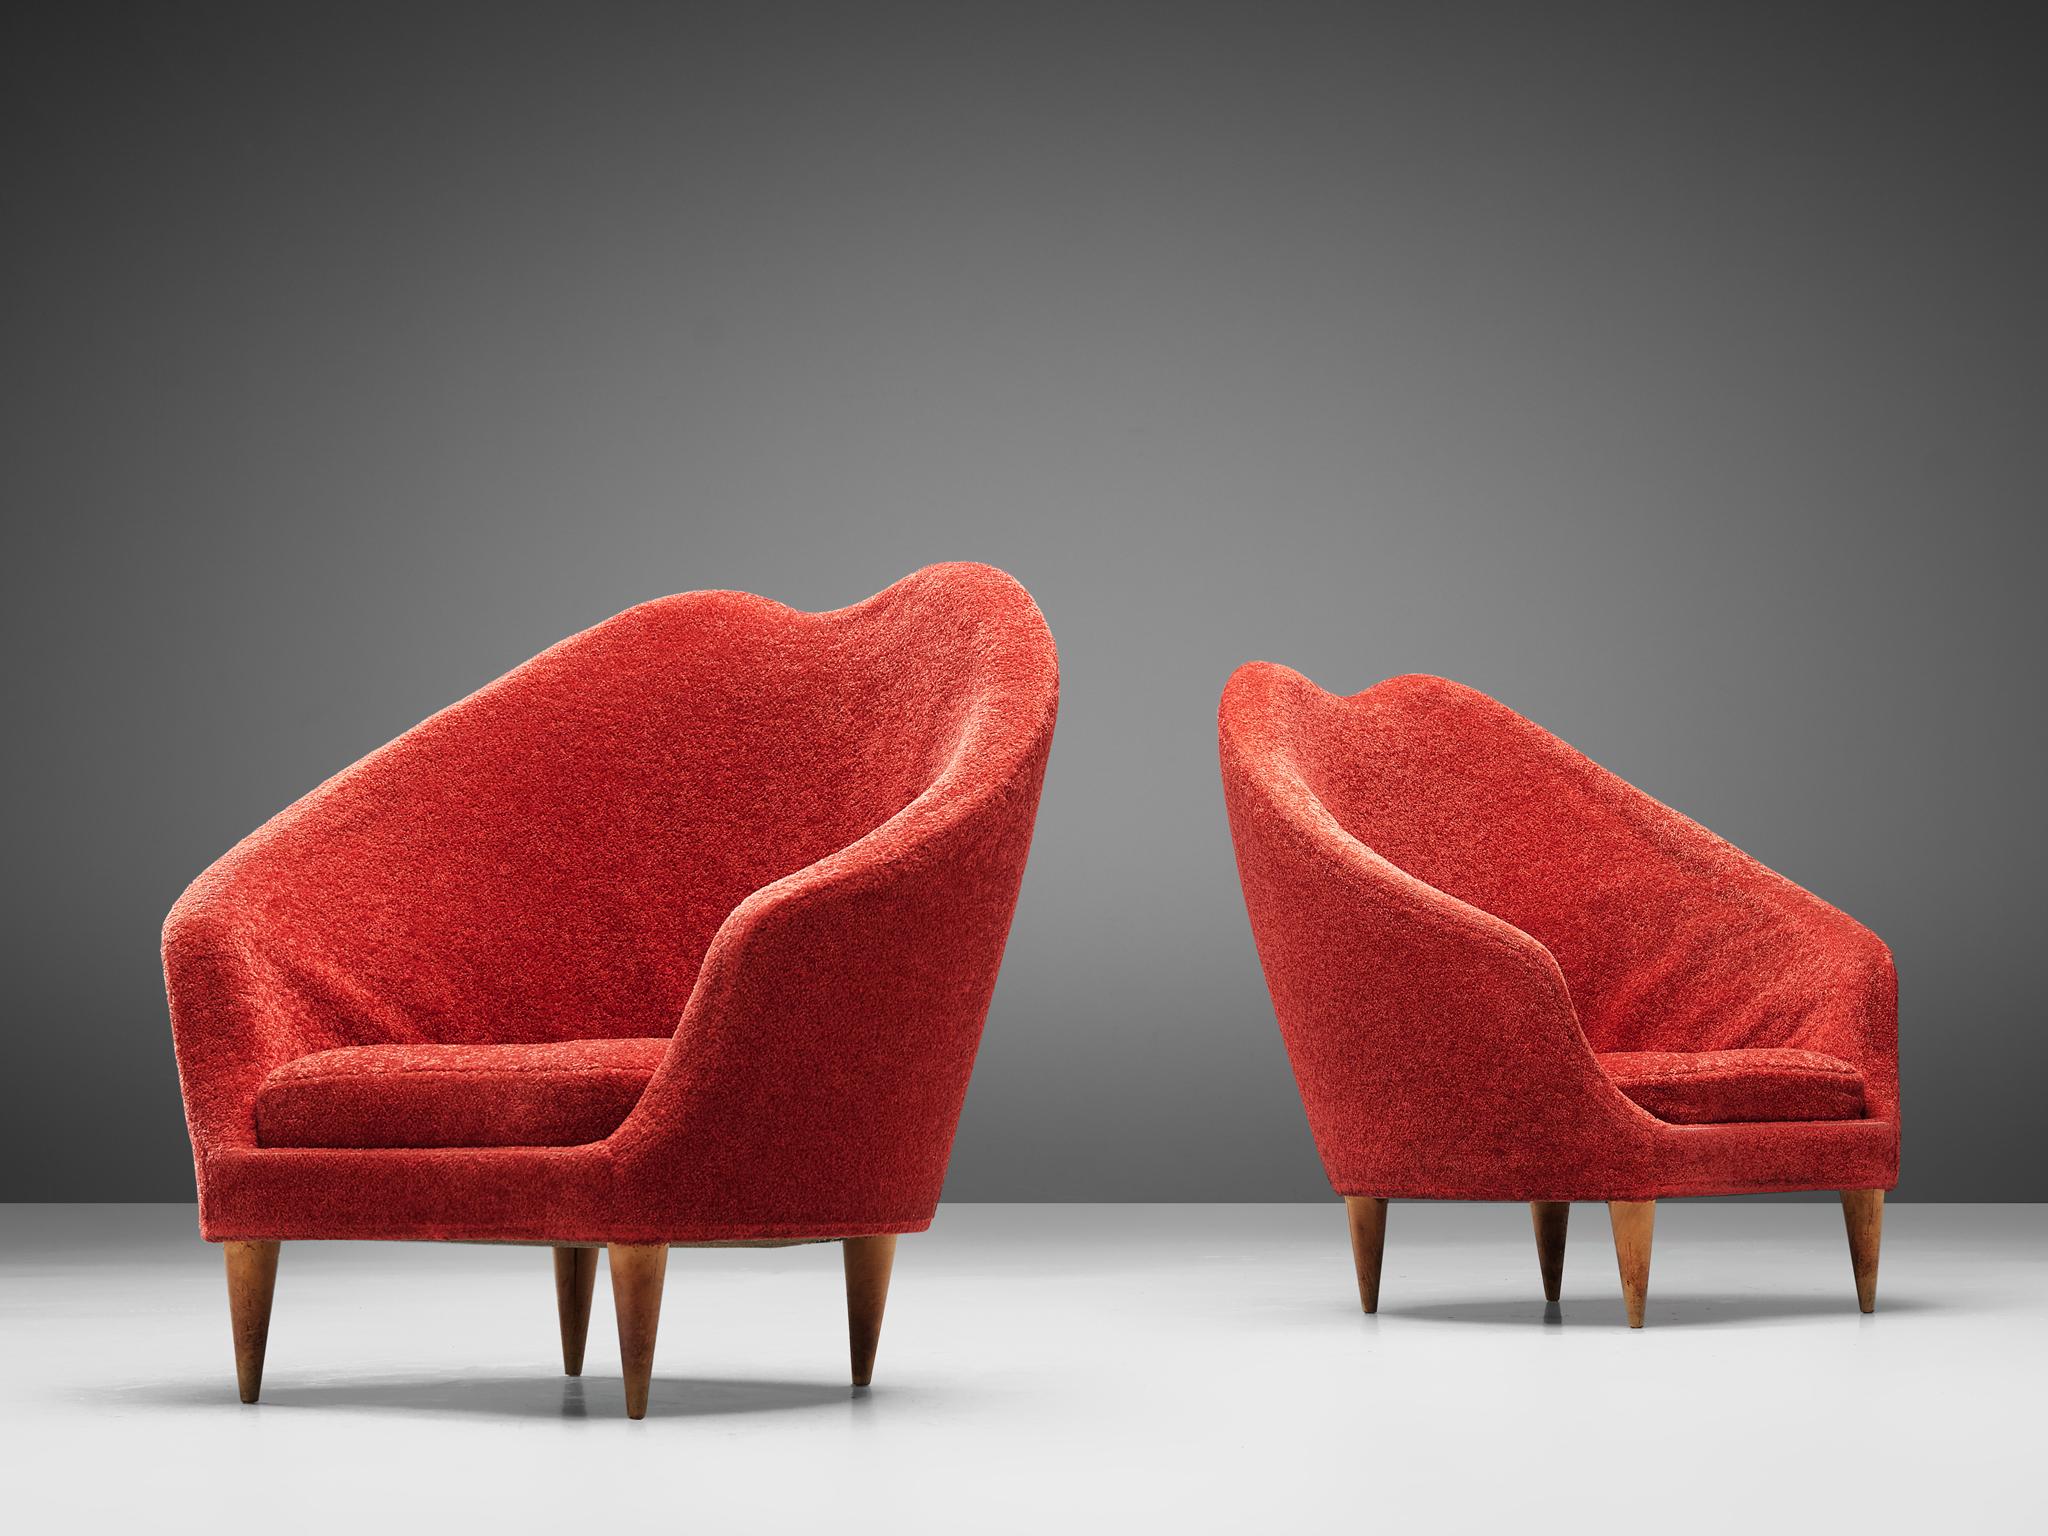 Federico Munari, pair of lounge chairs, fabric and wood, Italy, 1940s.

This theatrical, elegant set of lounge chairs feature a curved, to ascended back that flows over to the armrests. The backrests are bold and high, which gives these chairs